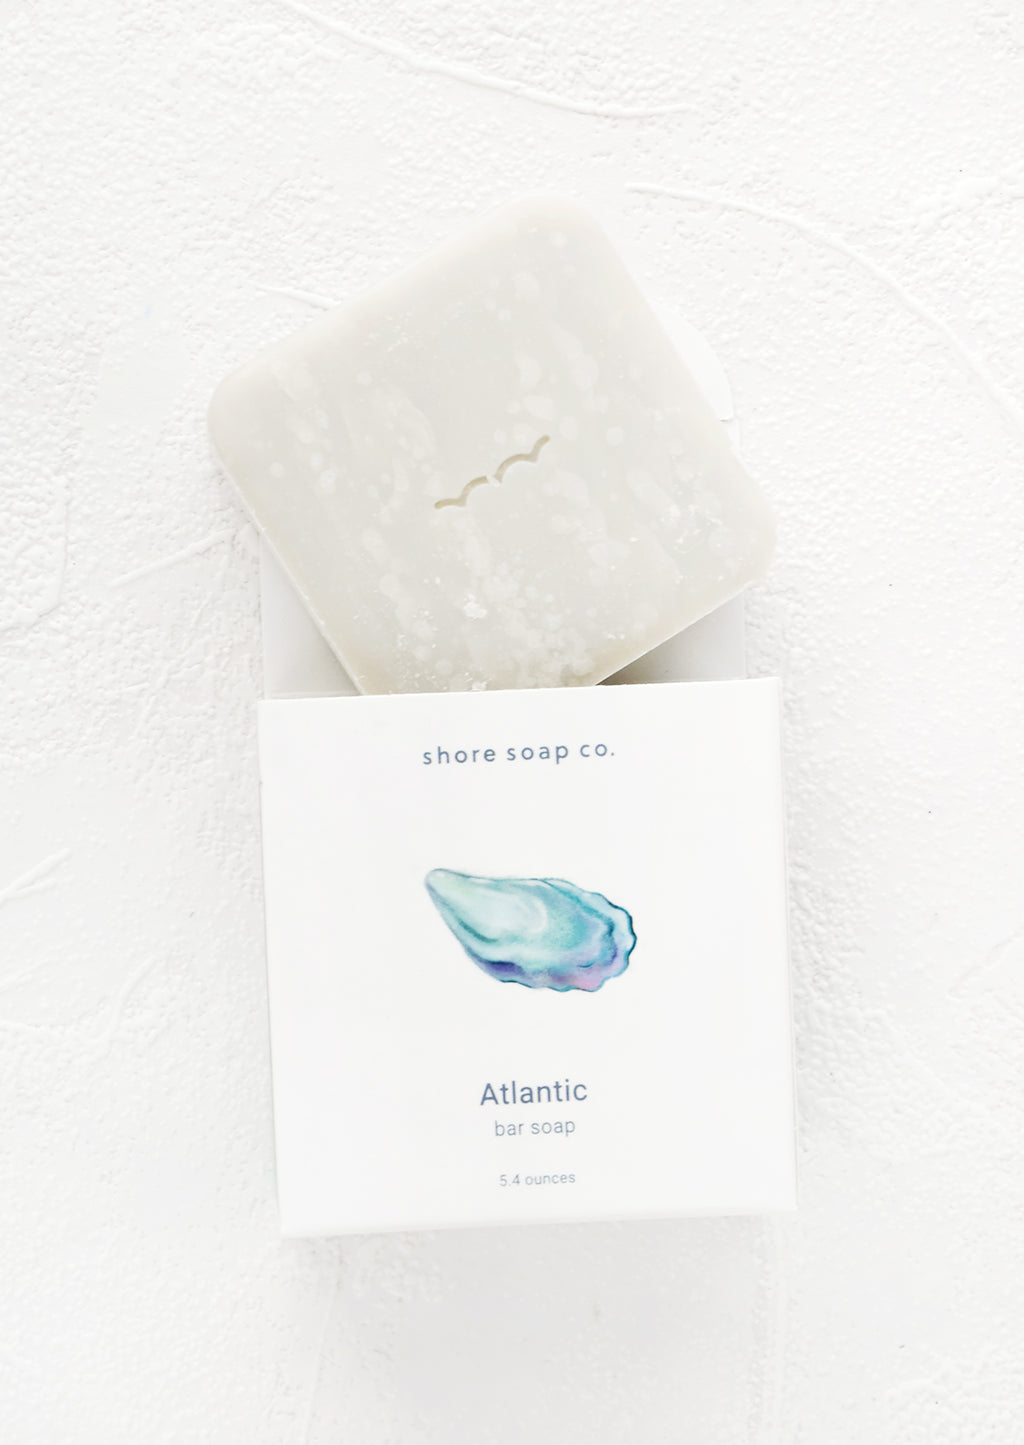 Atlantic: Square bar soap emerging from nautical themed packaging